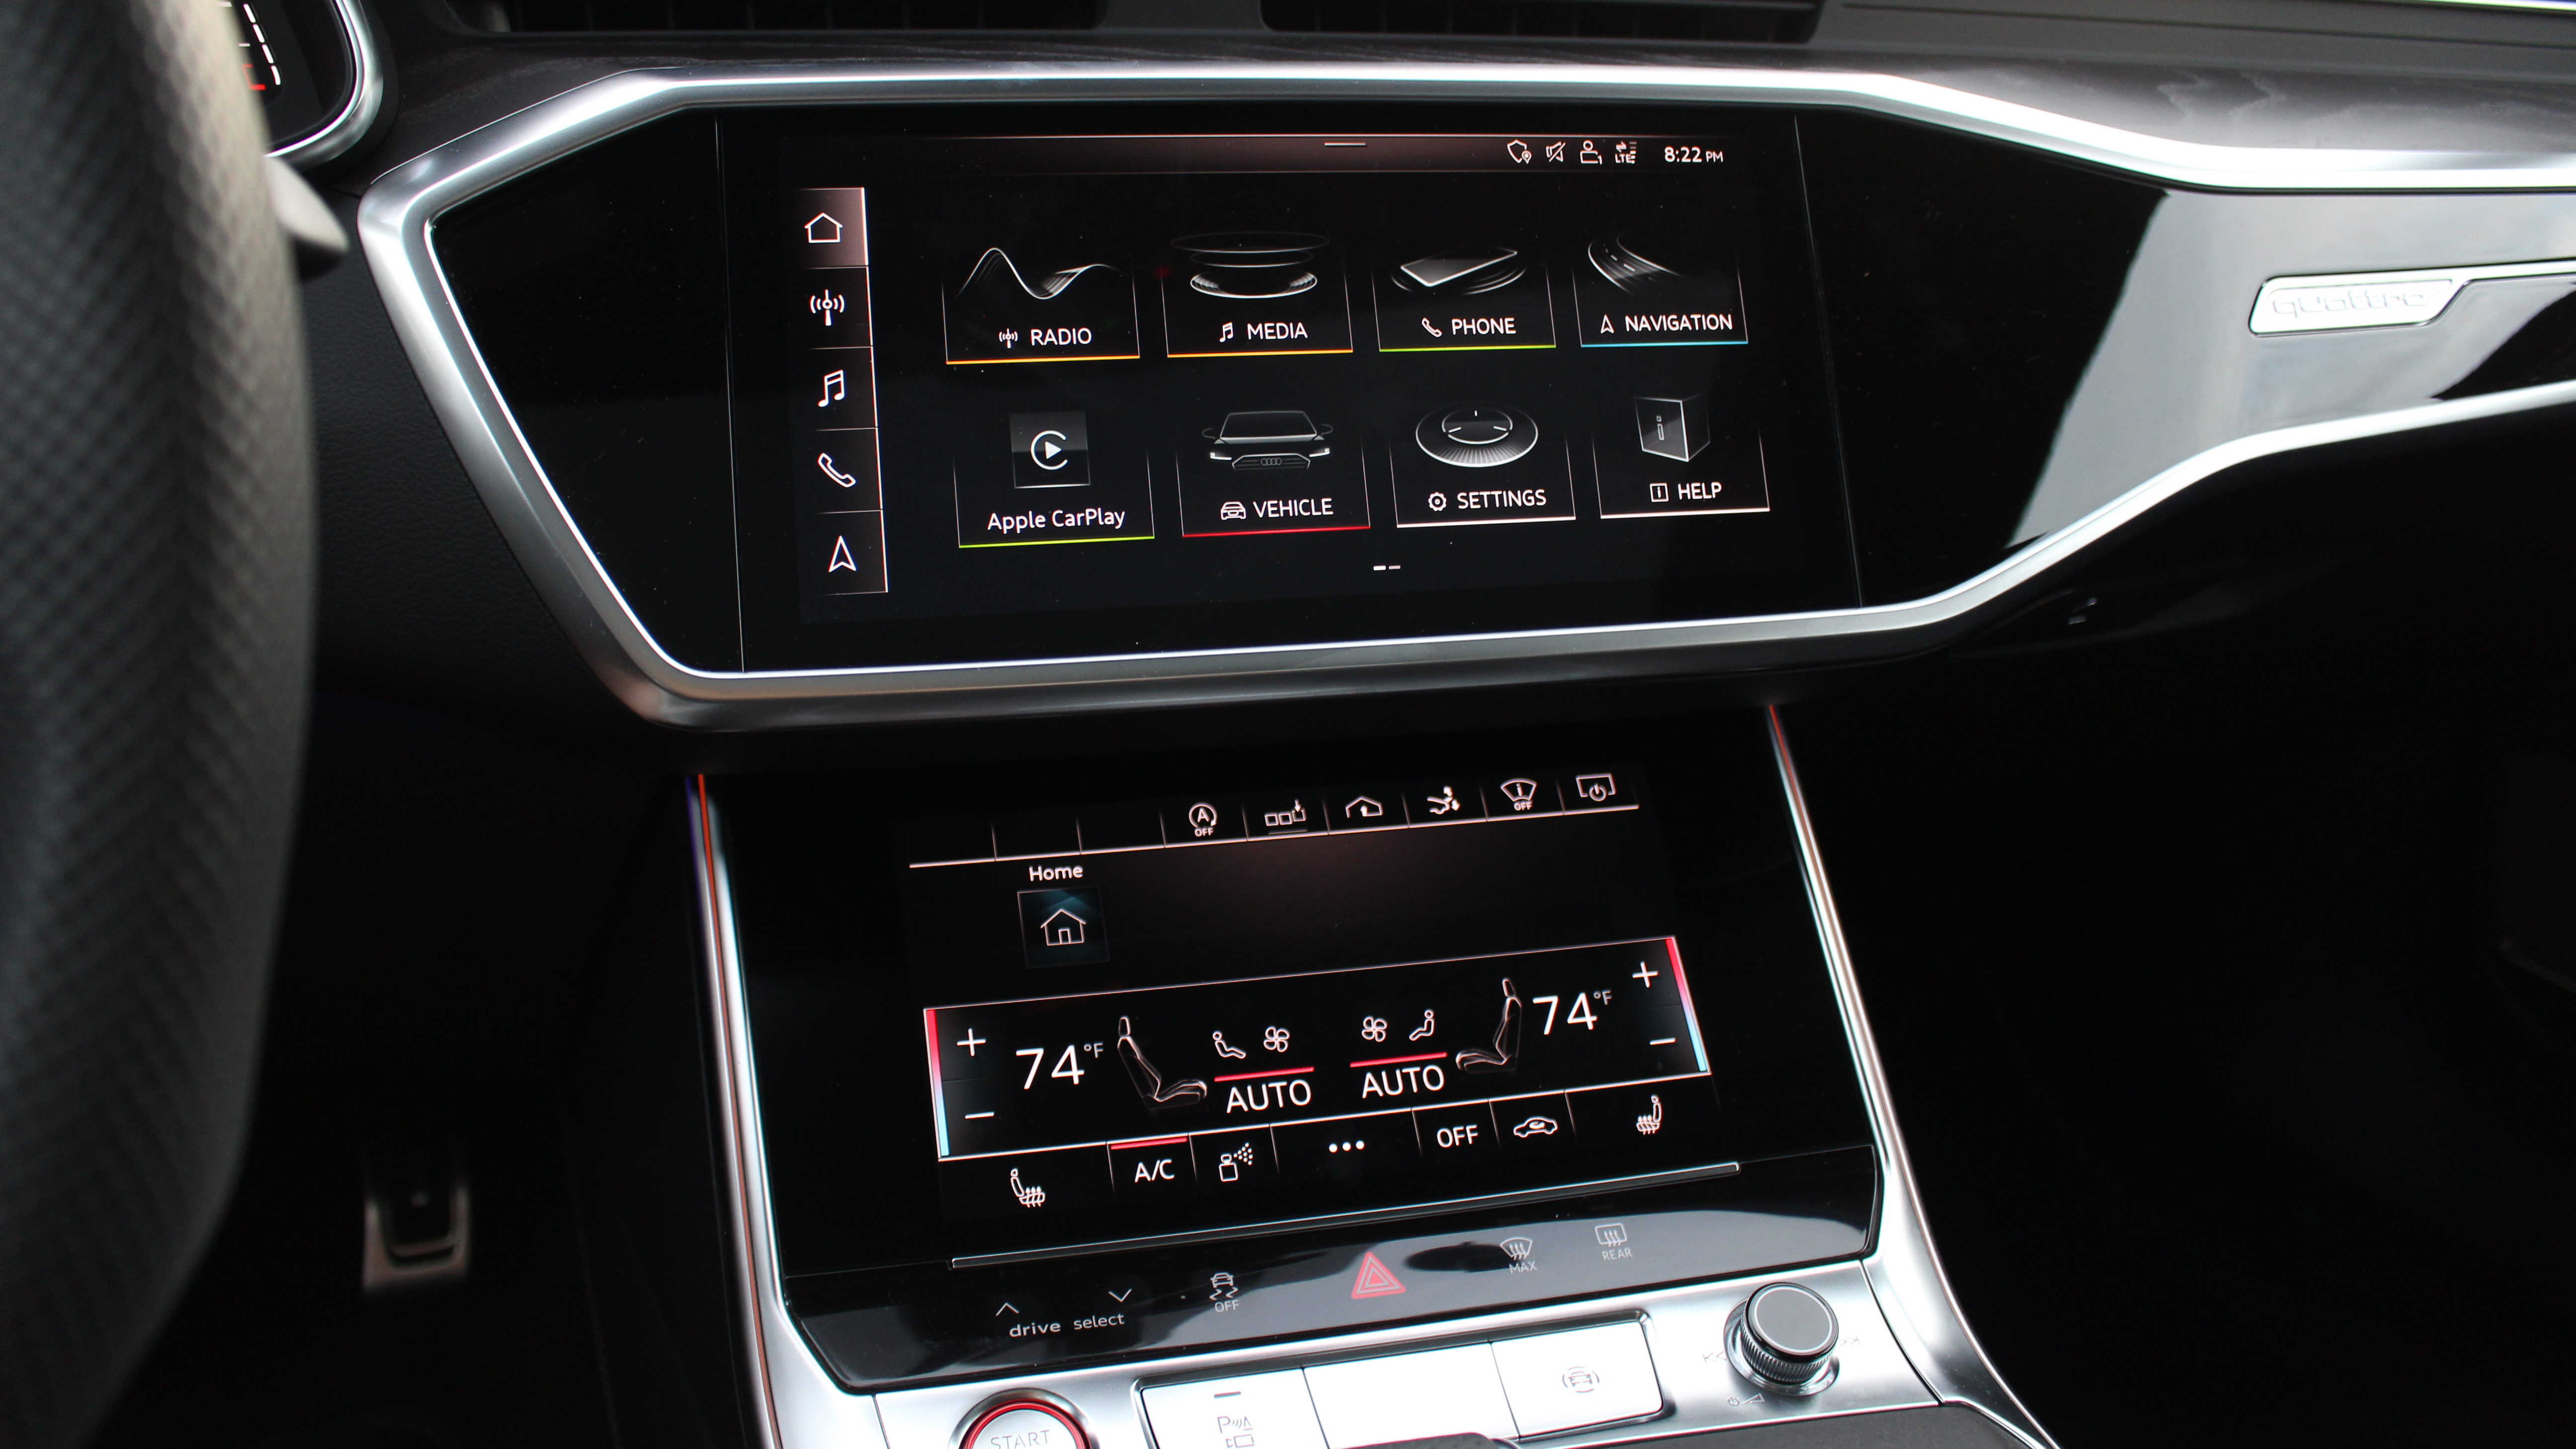 2020 Audi MMI Infotainment Review Video, guide, photos